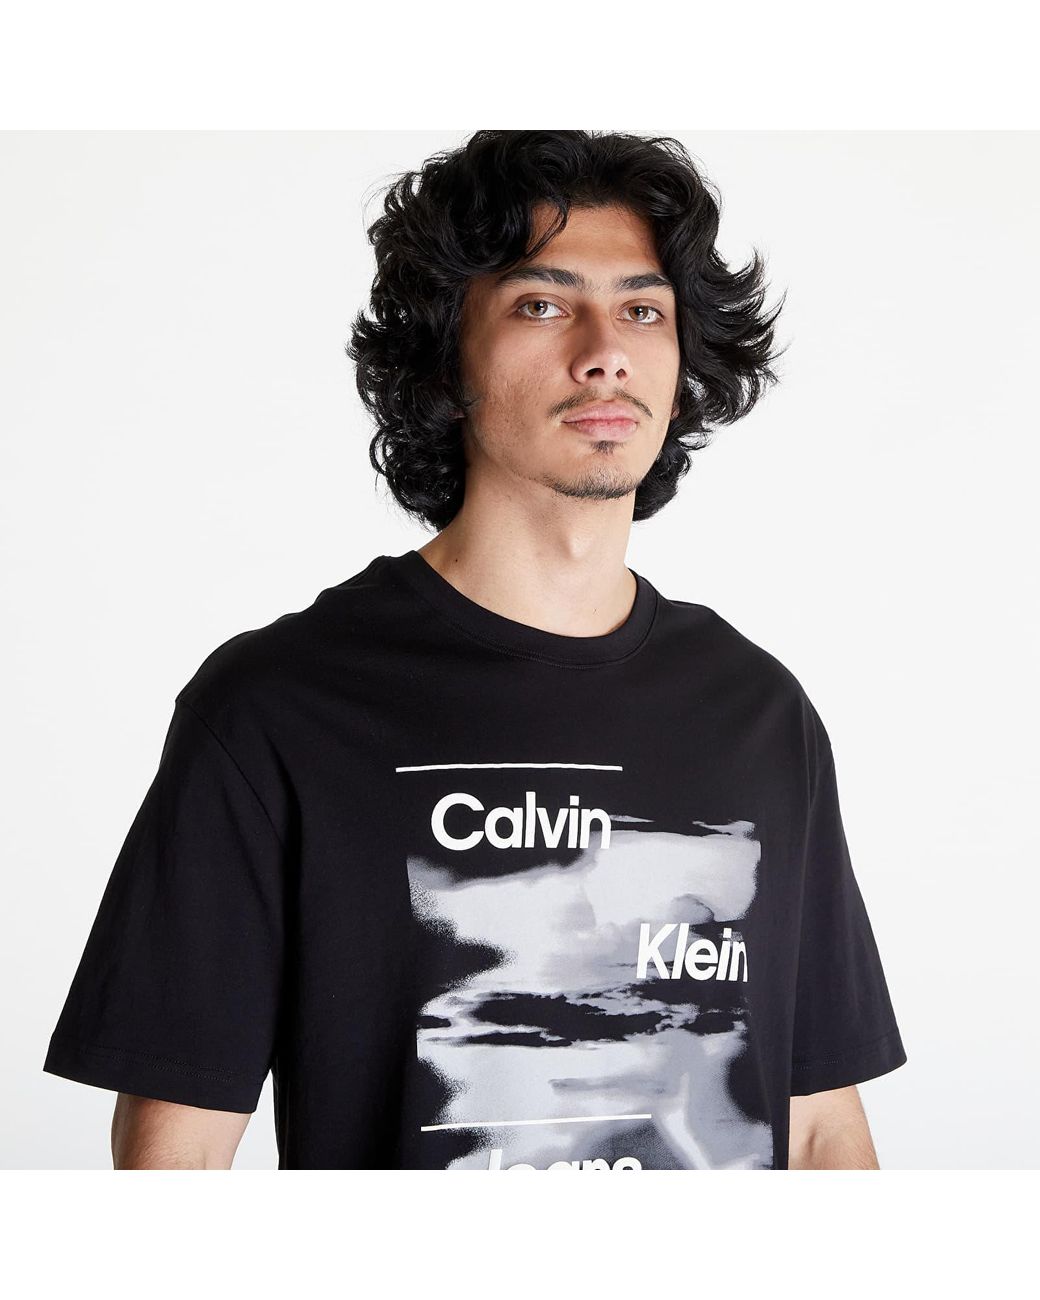 Calvin Klein Jeans t-shirt in black with sleeve institutional logo